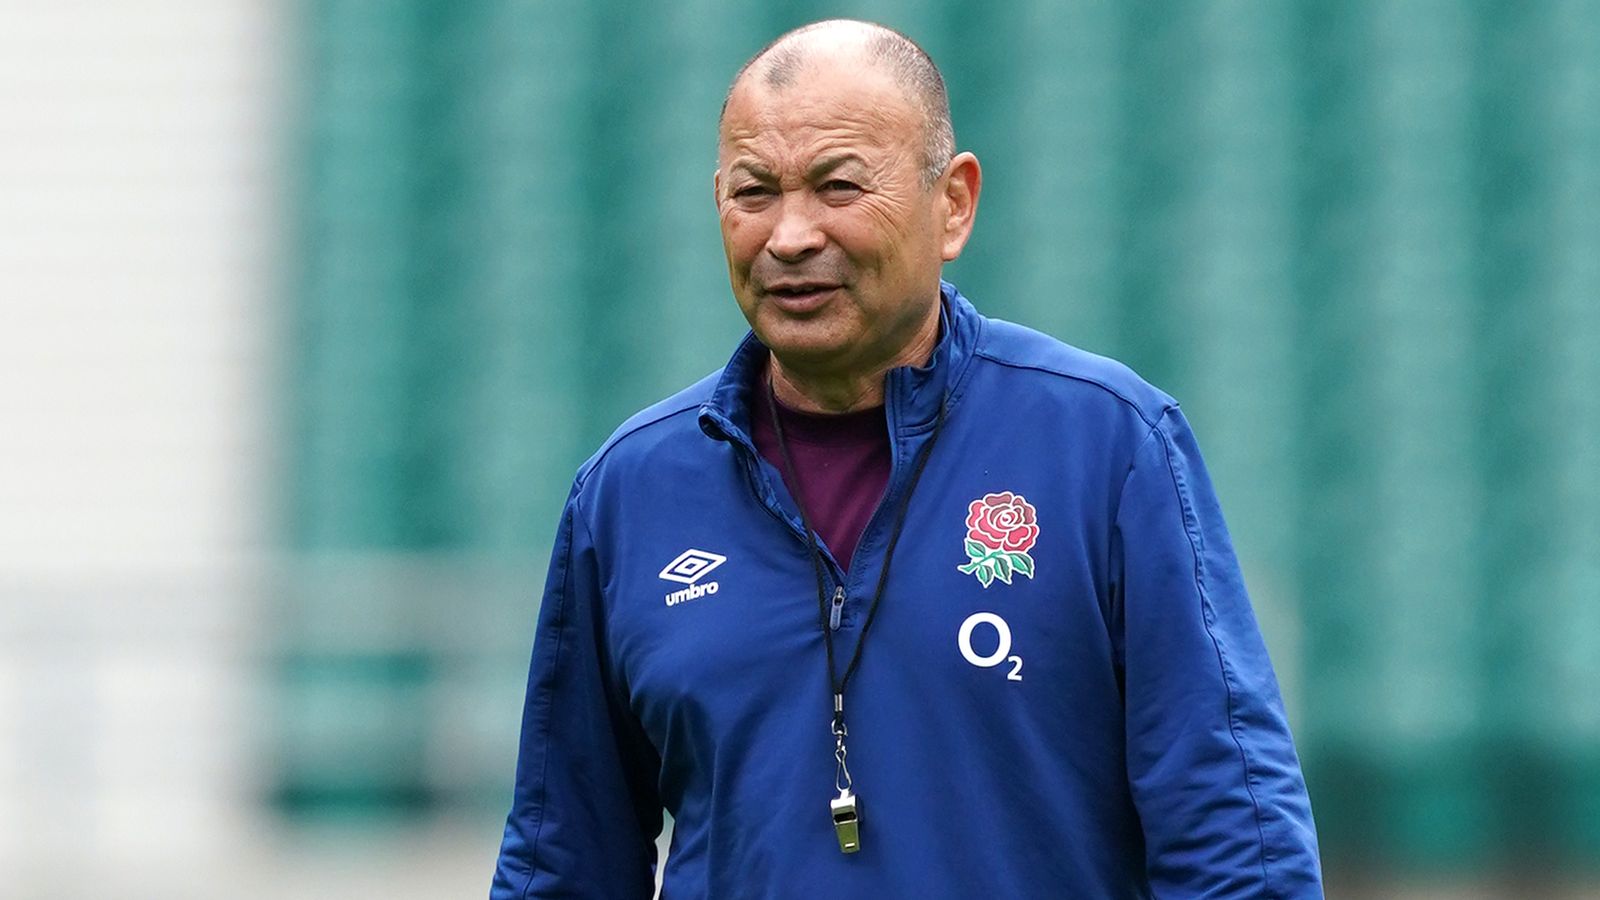 England’s younger gamers have ‘extremely thrilling’ potential for Eddie Jones and 2023 Rugby World Cup, says Conor O’Shea